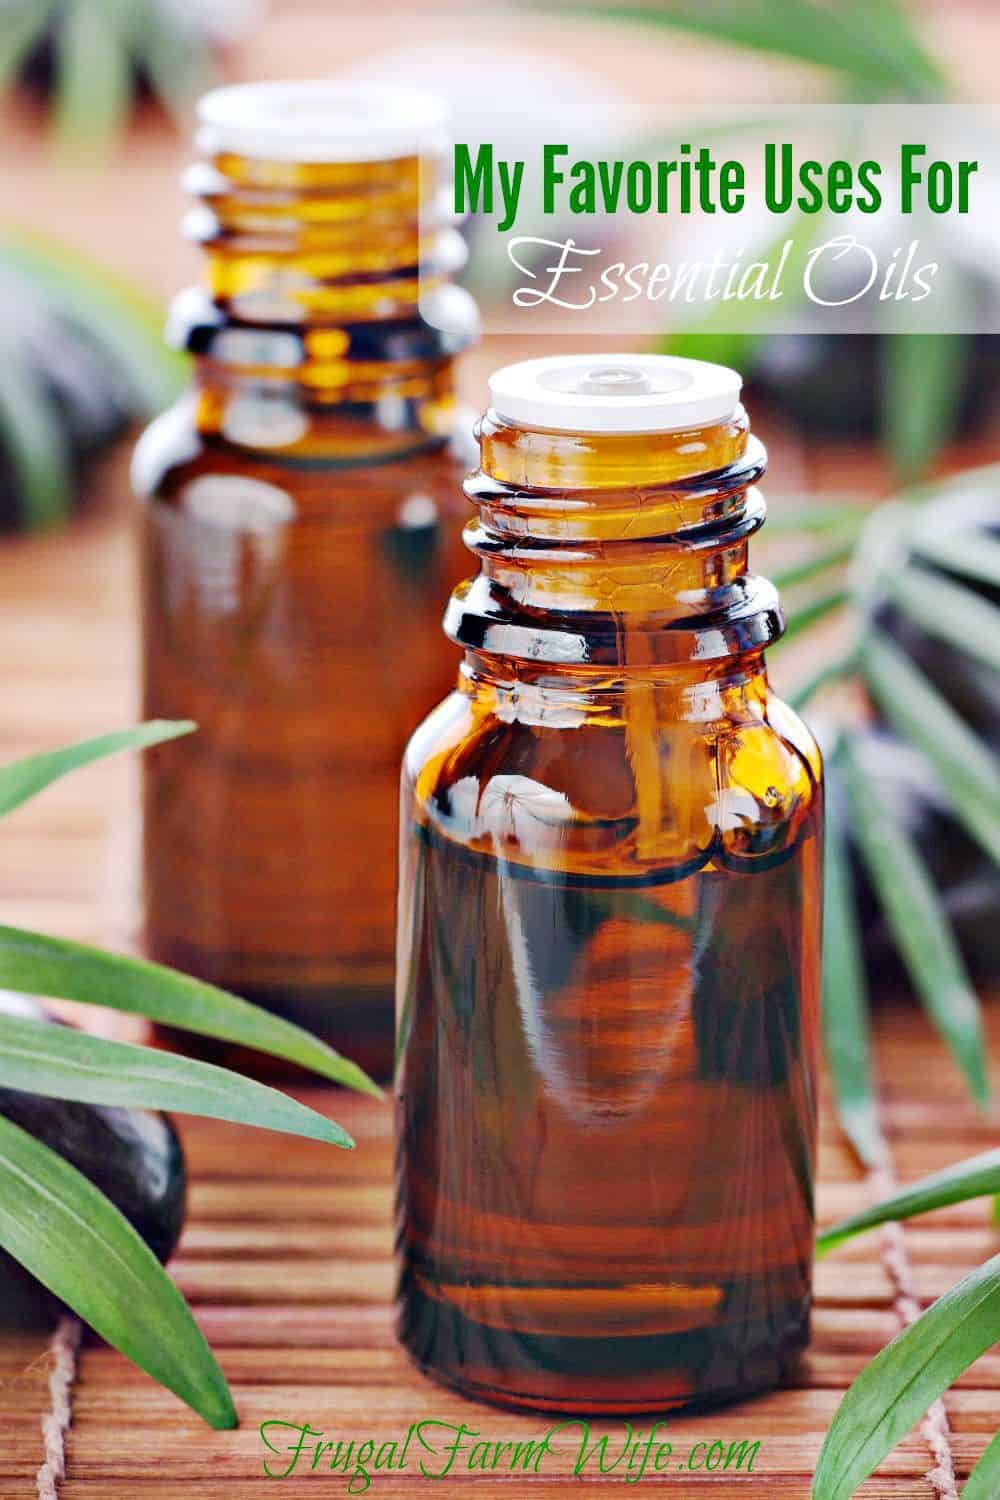 My Favorite Ever Uses for Essential Oils